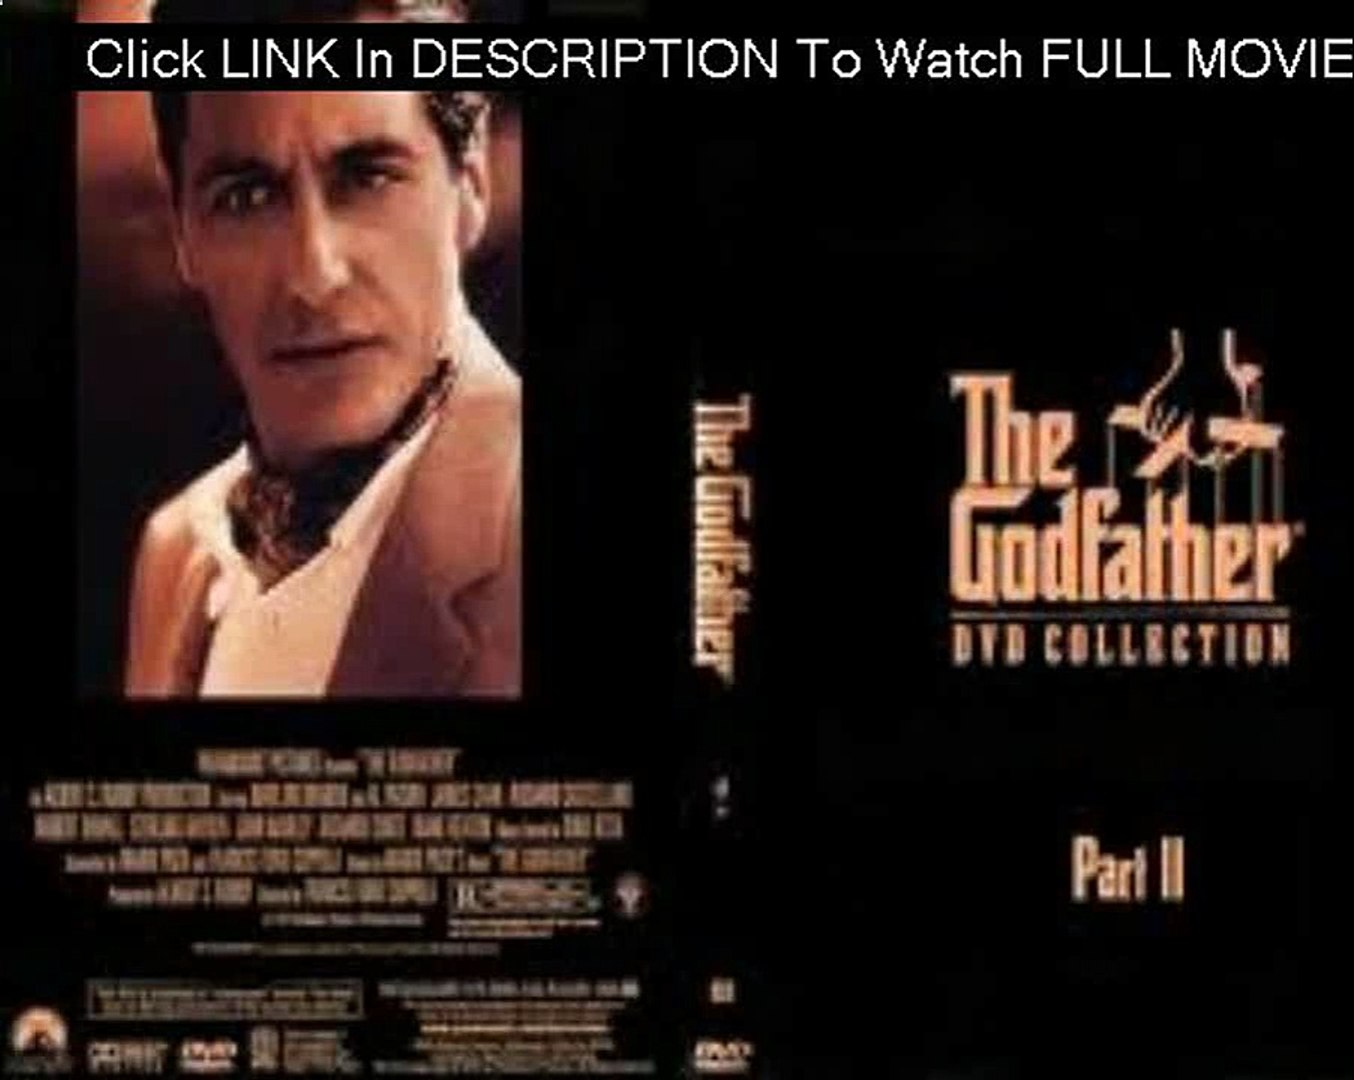 Watch The Godfather Part Ii 1974 Full Movie Online Streaming Video Dailymotion